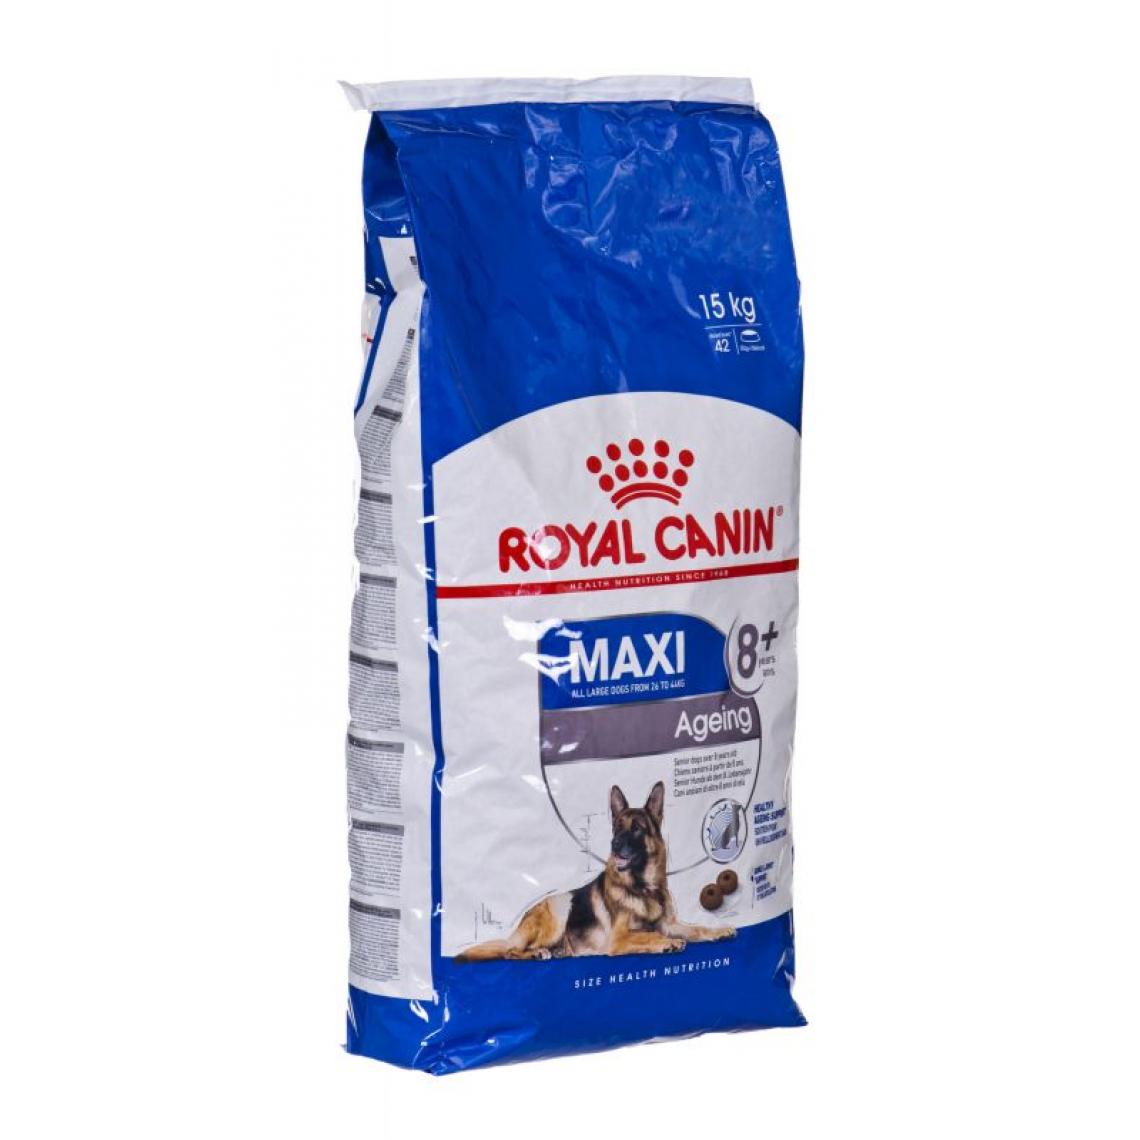 Royal Canin - Royal Canin Size Maxi Ageing 8+ Adultes 15,3 kg - Croquettes pour chien